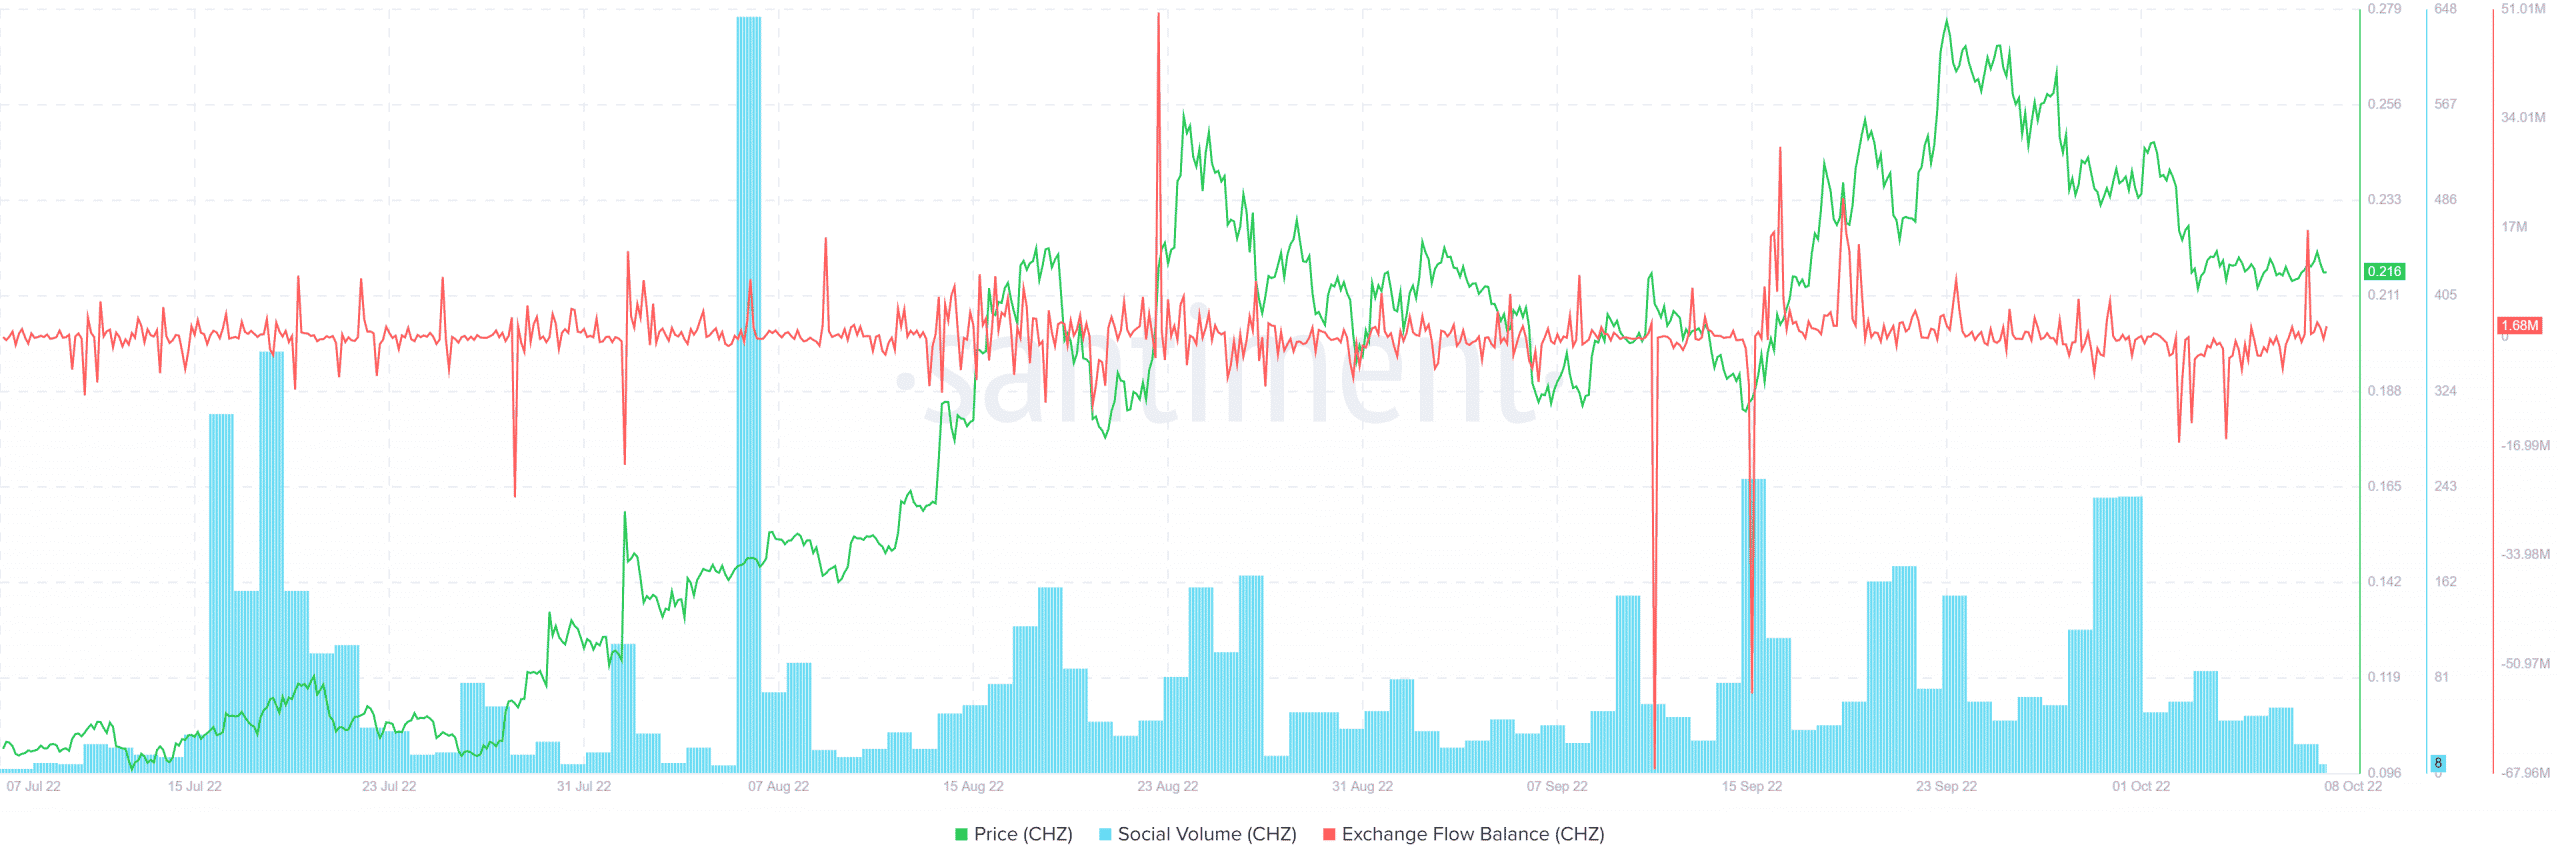 Chiliz flips momentum to bearish, could WC narrative change its direction?